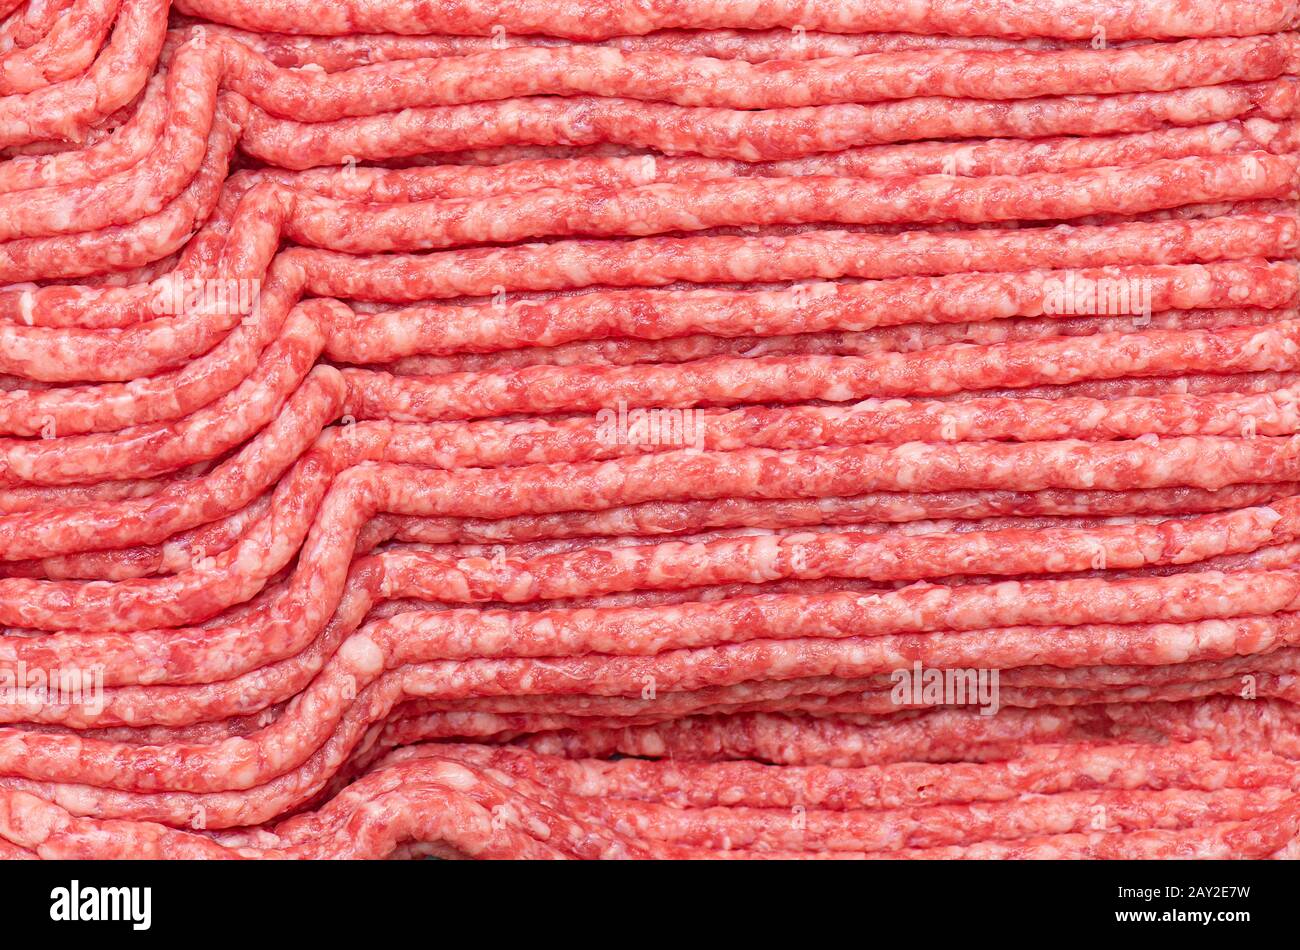 Minced meat seamless pattern Stock Photo by ©voronin-76 2577827